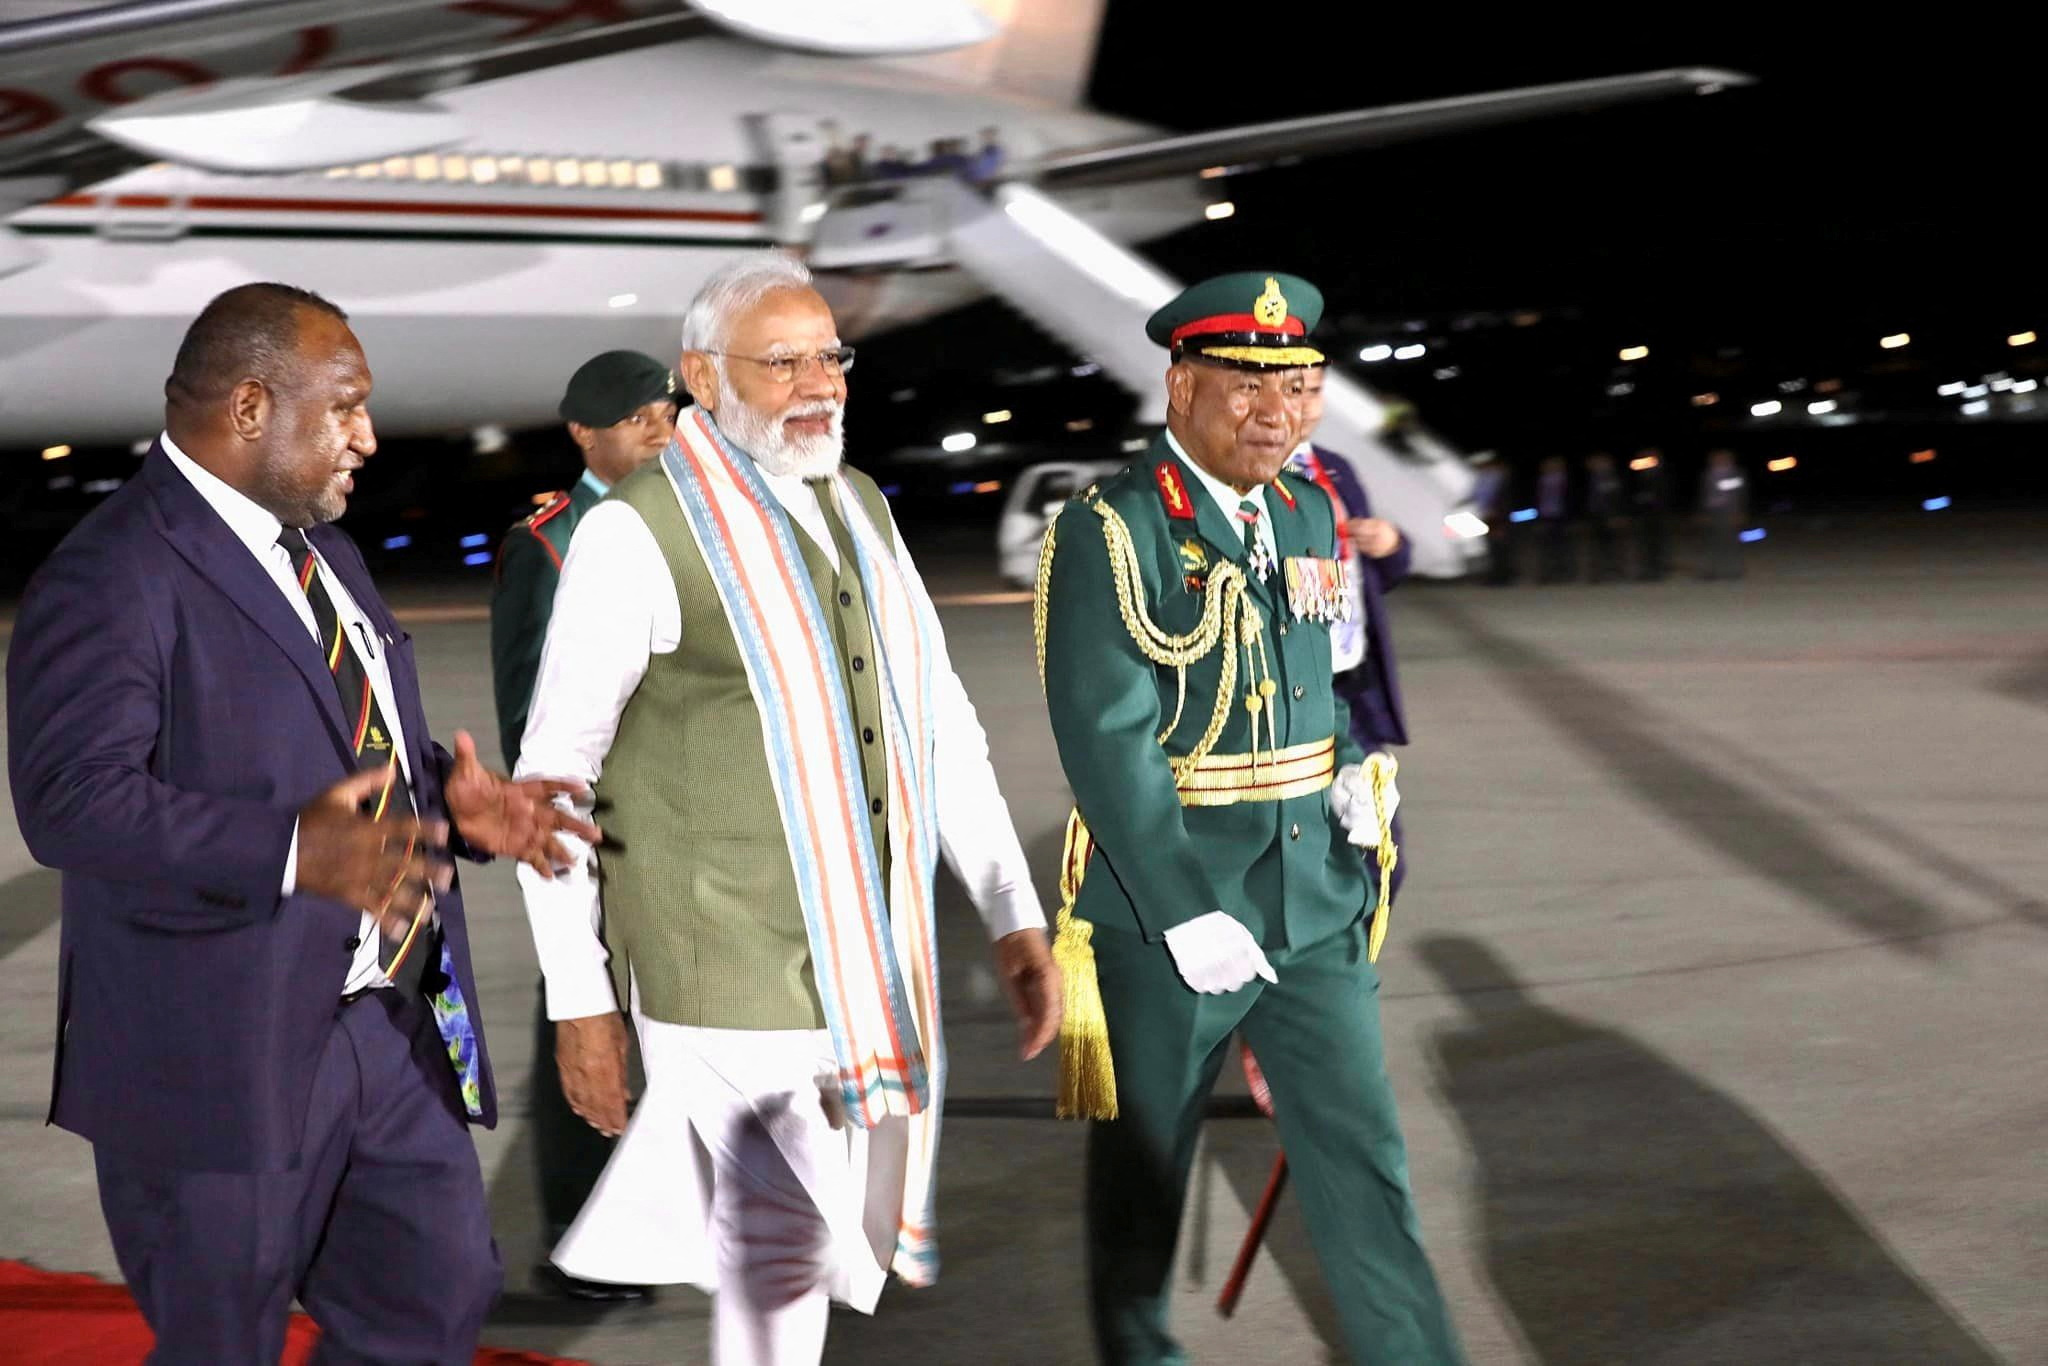 Prime Minister Modi of India being greeted by Prime Minister Marape of Papua New Guinea at Jackson International Airport, Papua New Guinea